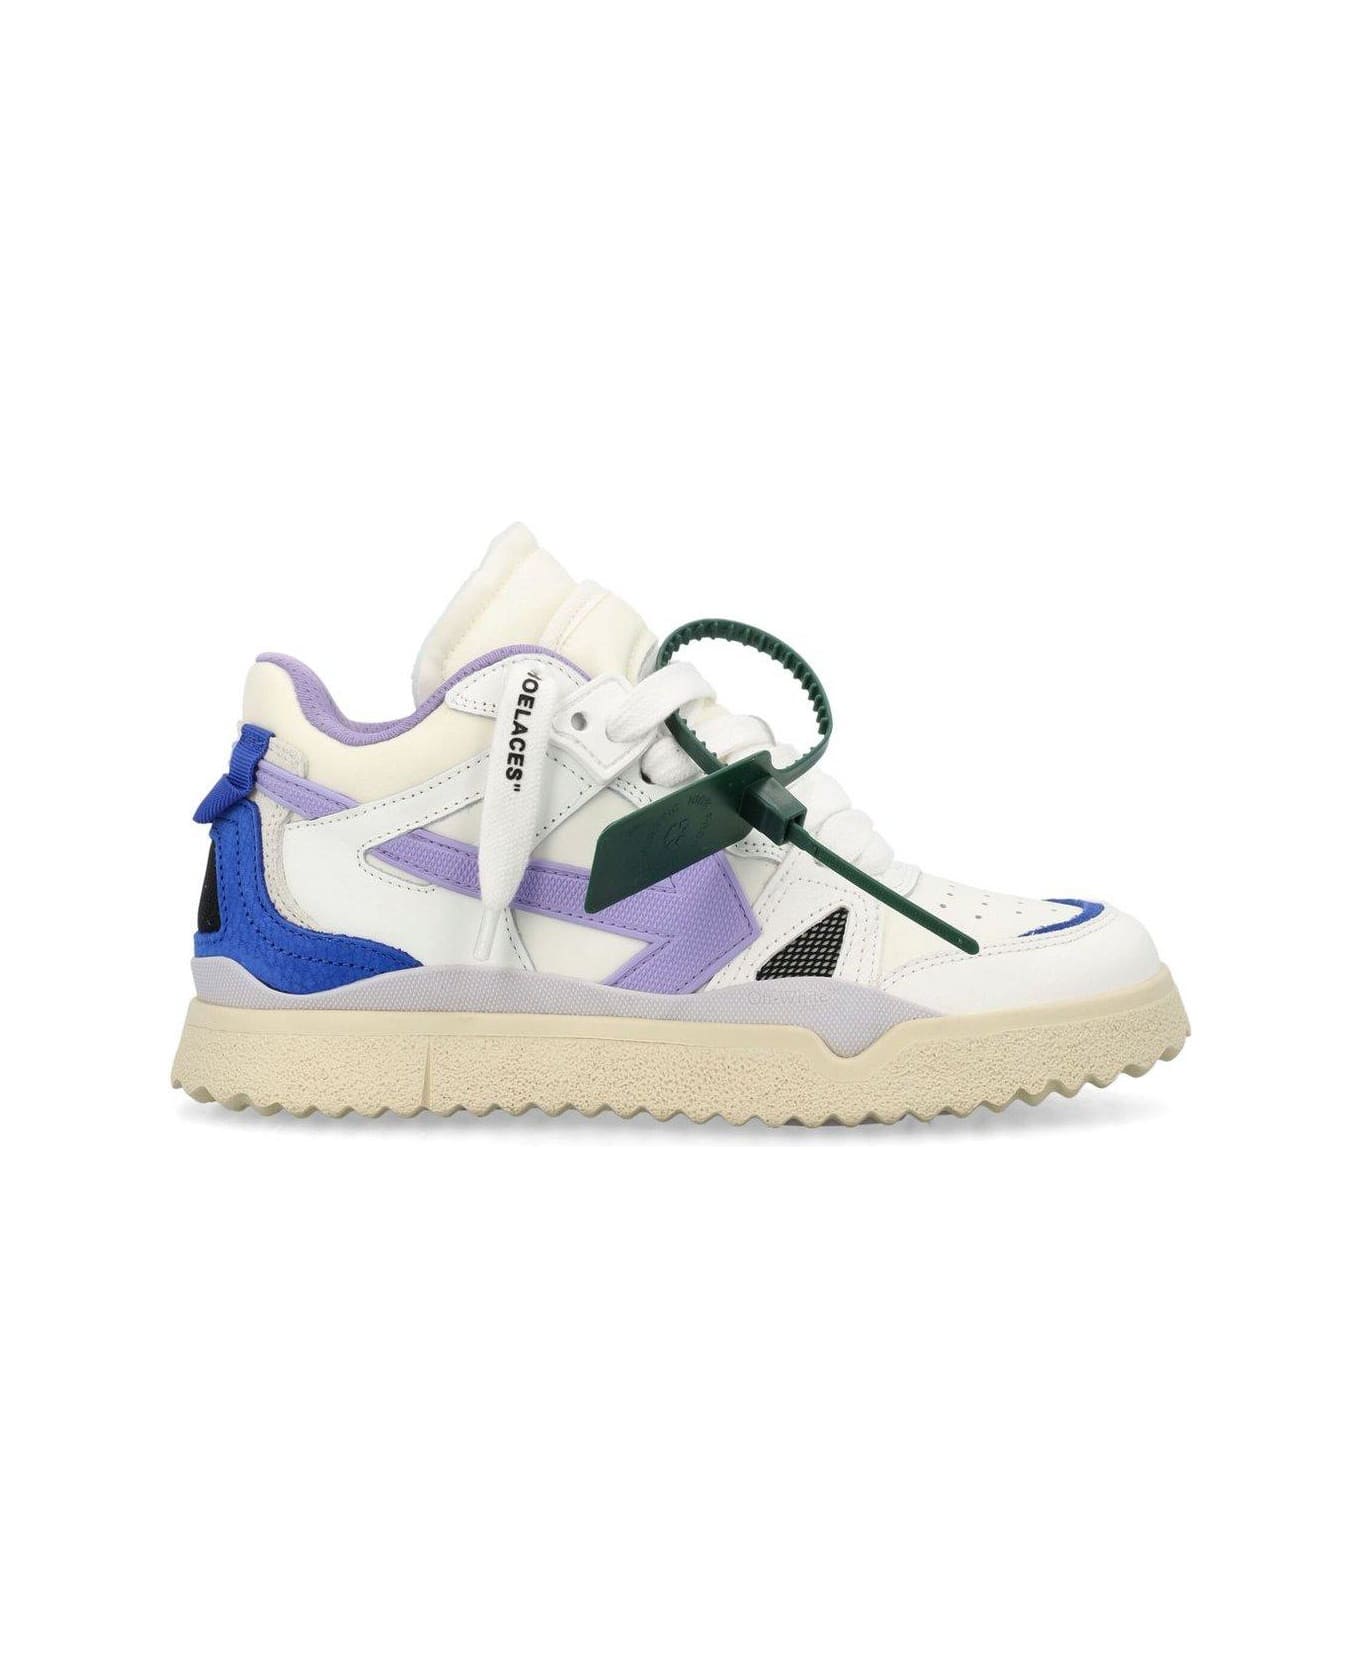 Off-White Sponge Lace-up Sneakers - White Lilac スニーカー